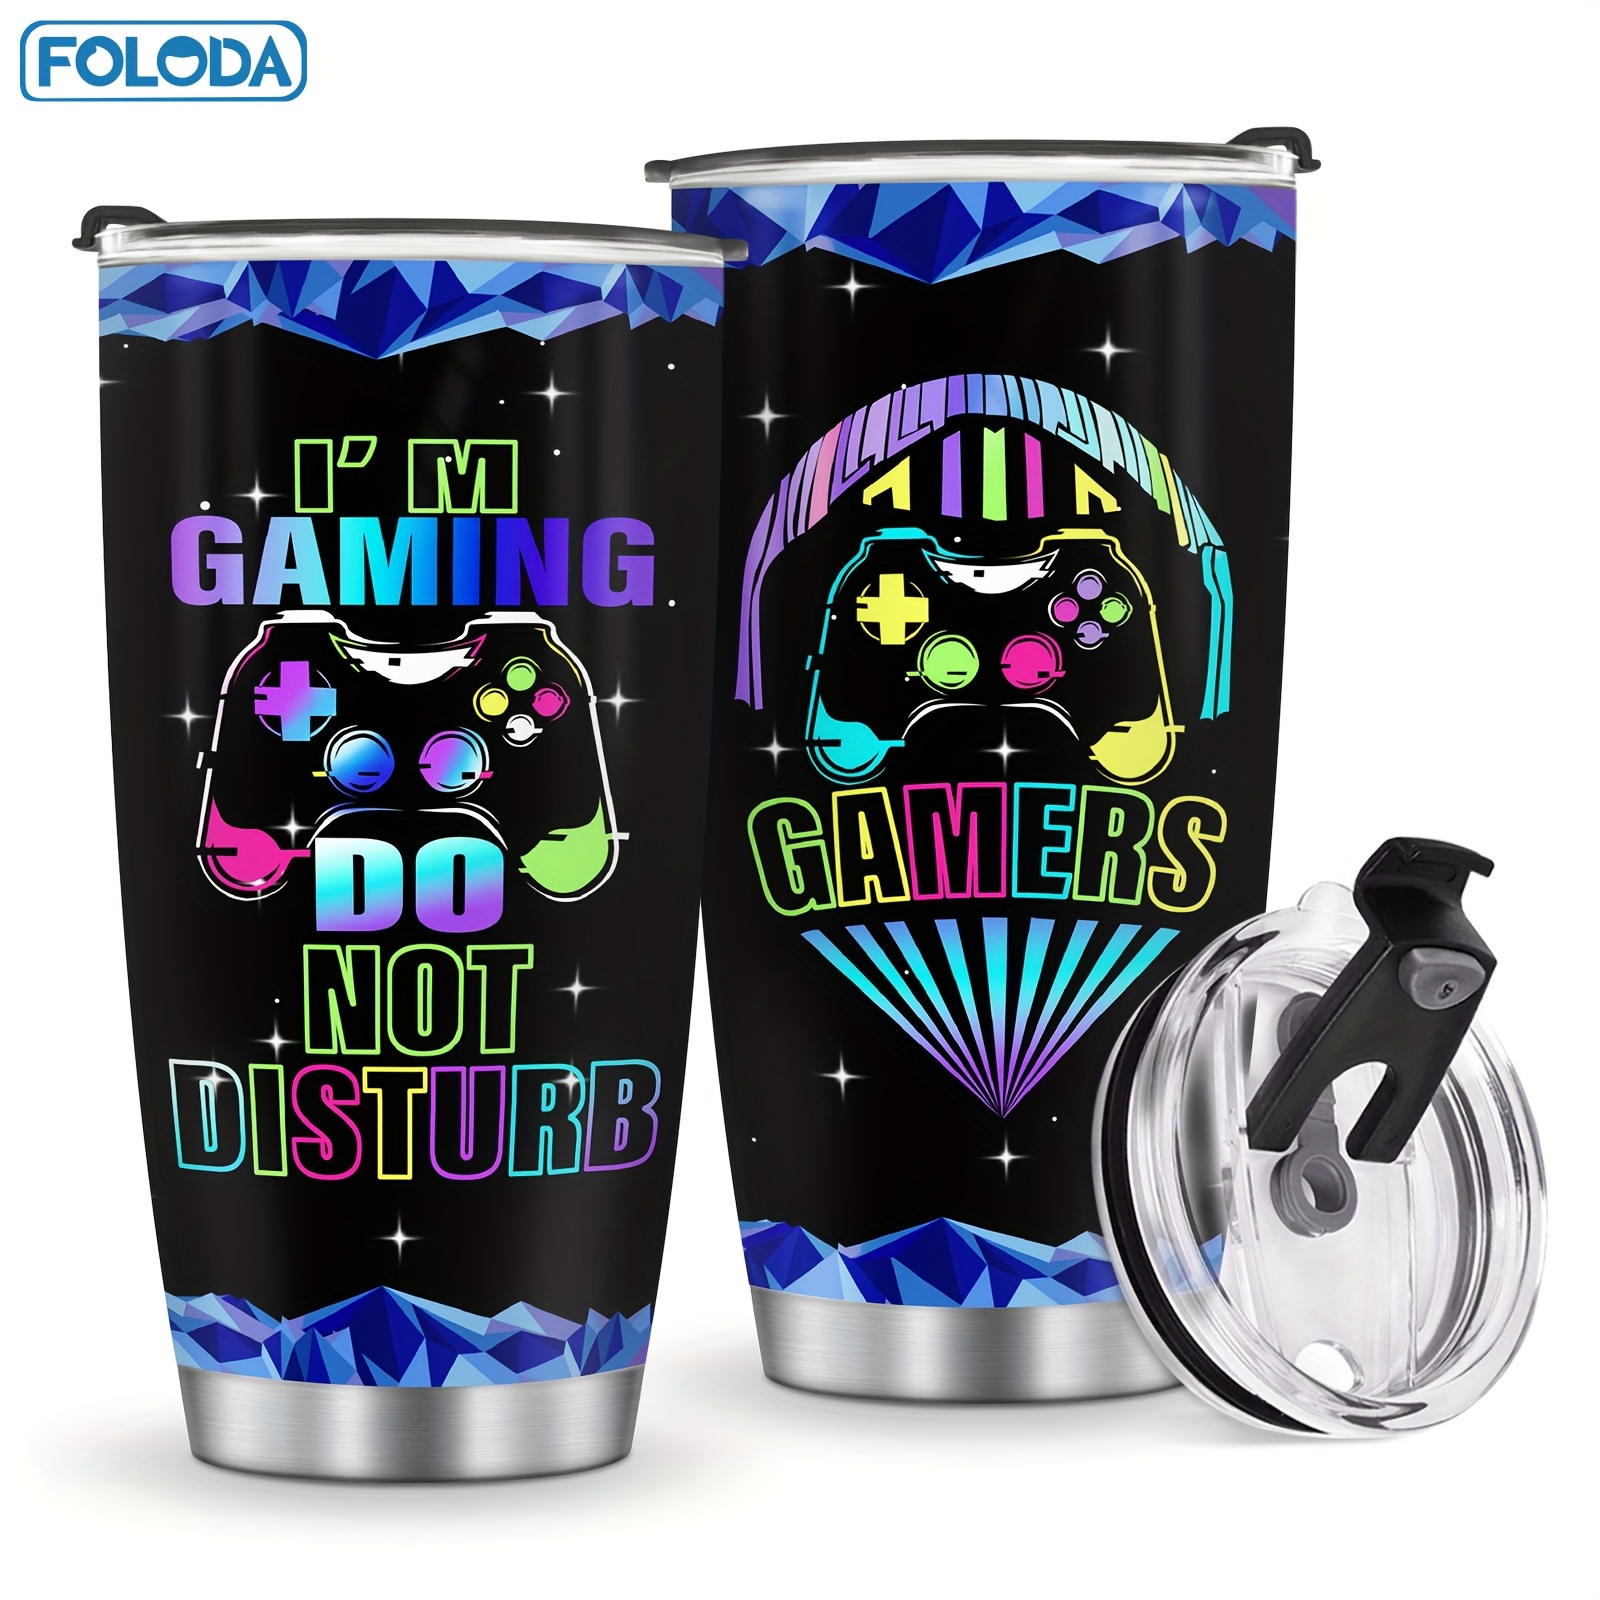 

Foloda 20oz Insulated Stainless Steel Gamer Tumbler With Lid - Perfect Gift For Gamers, Hot & Cold Drink Mug, Ideal For Men, Teens & Game Lovers